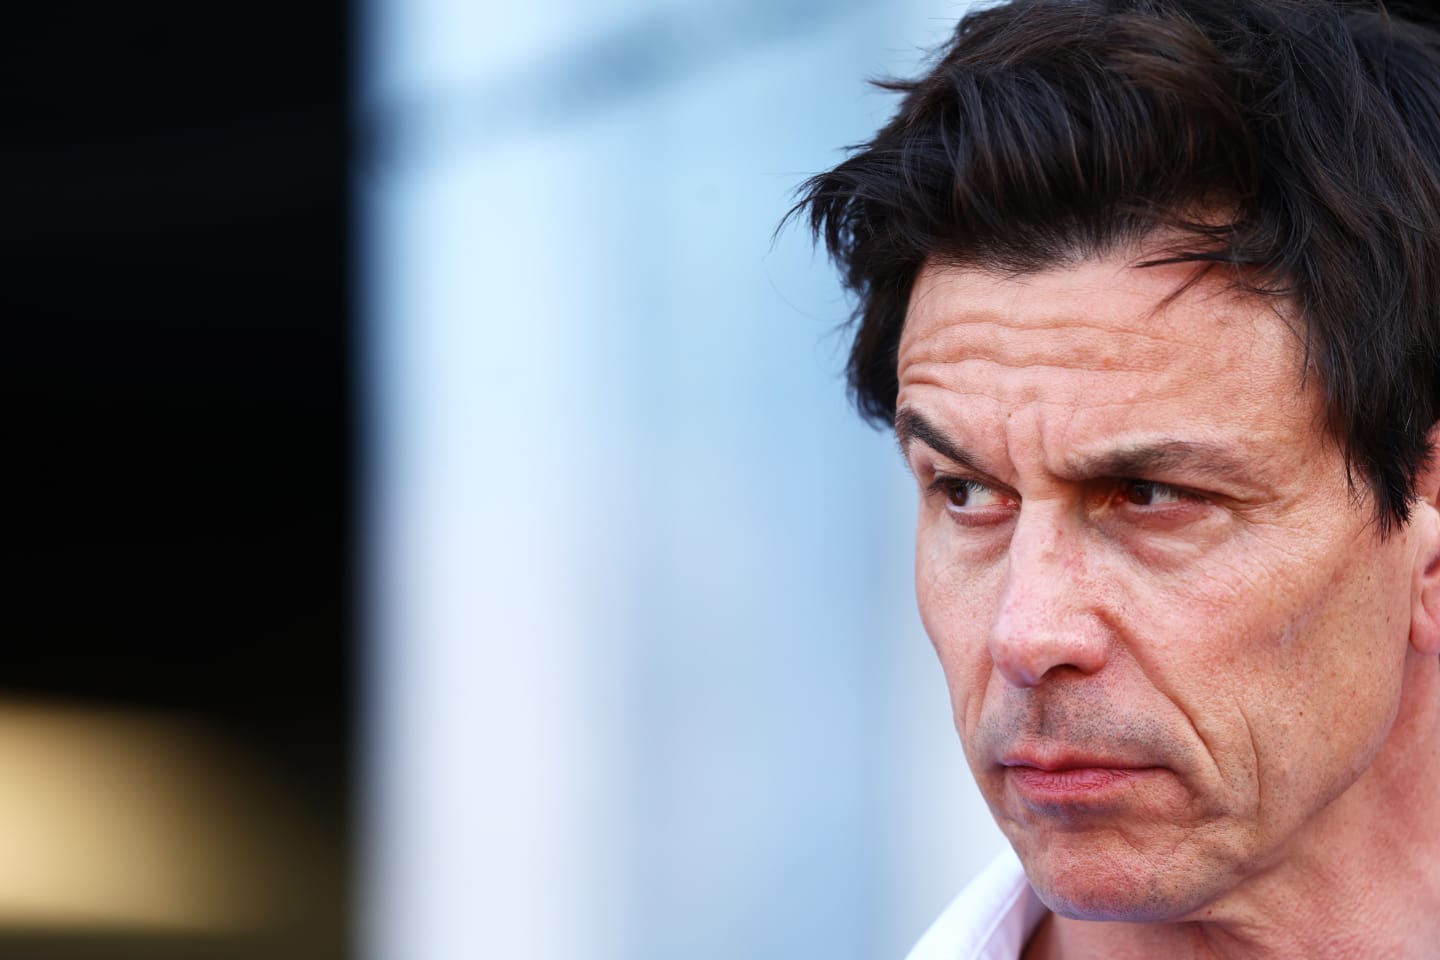 MONTE-CARLO, MONACO - MAY 26: Mercedes GP Executive Director Toto Wolff looks on in the Paddock